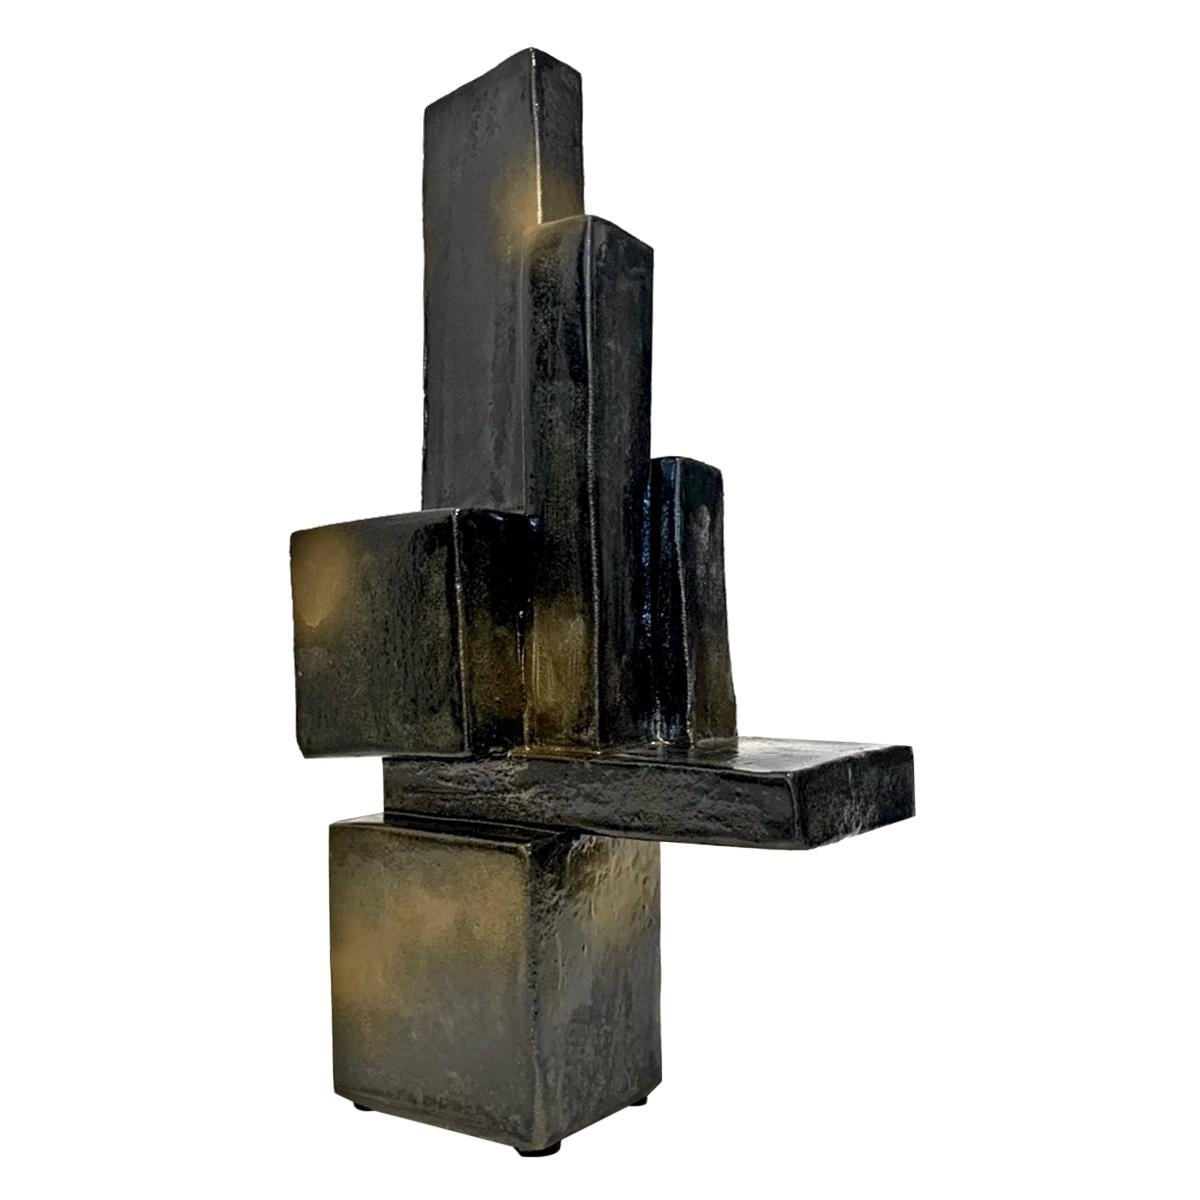 Architectural Ceramic Sculpture with Palladium and Gold Glaze by Judy Engel